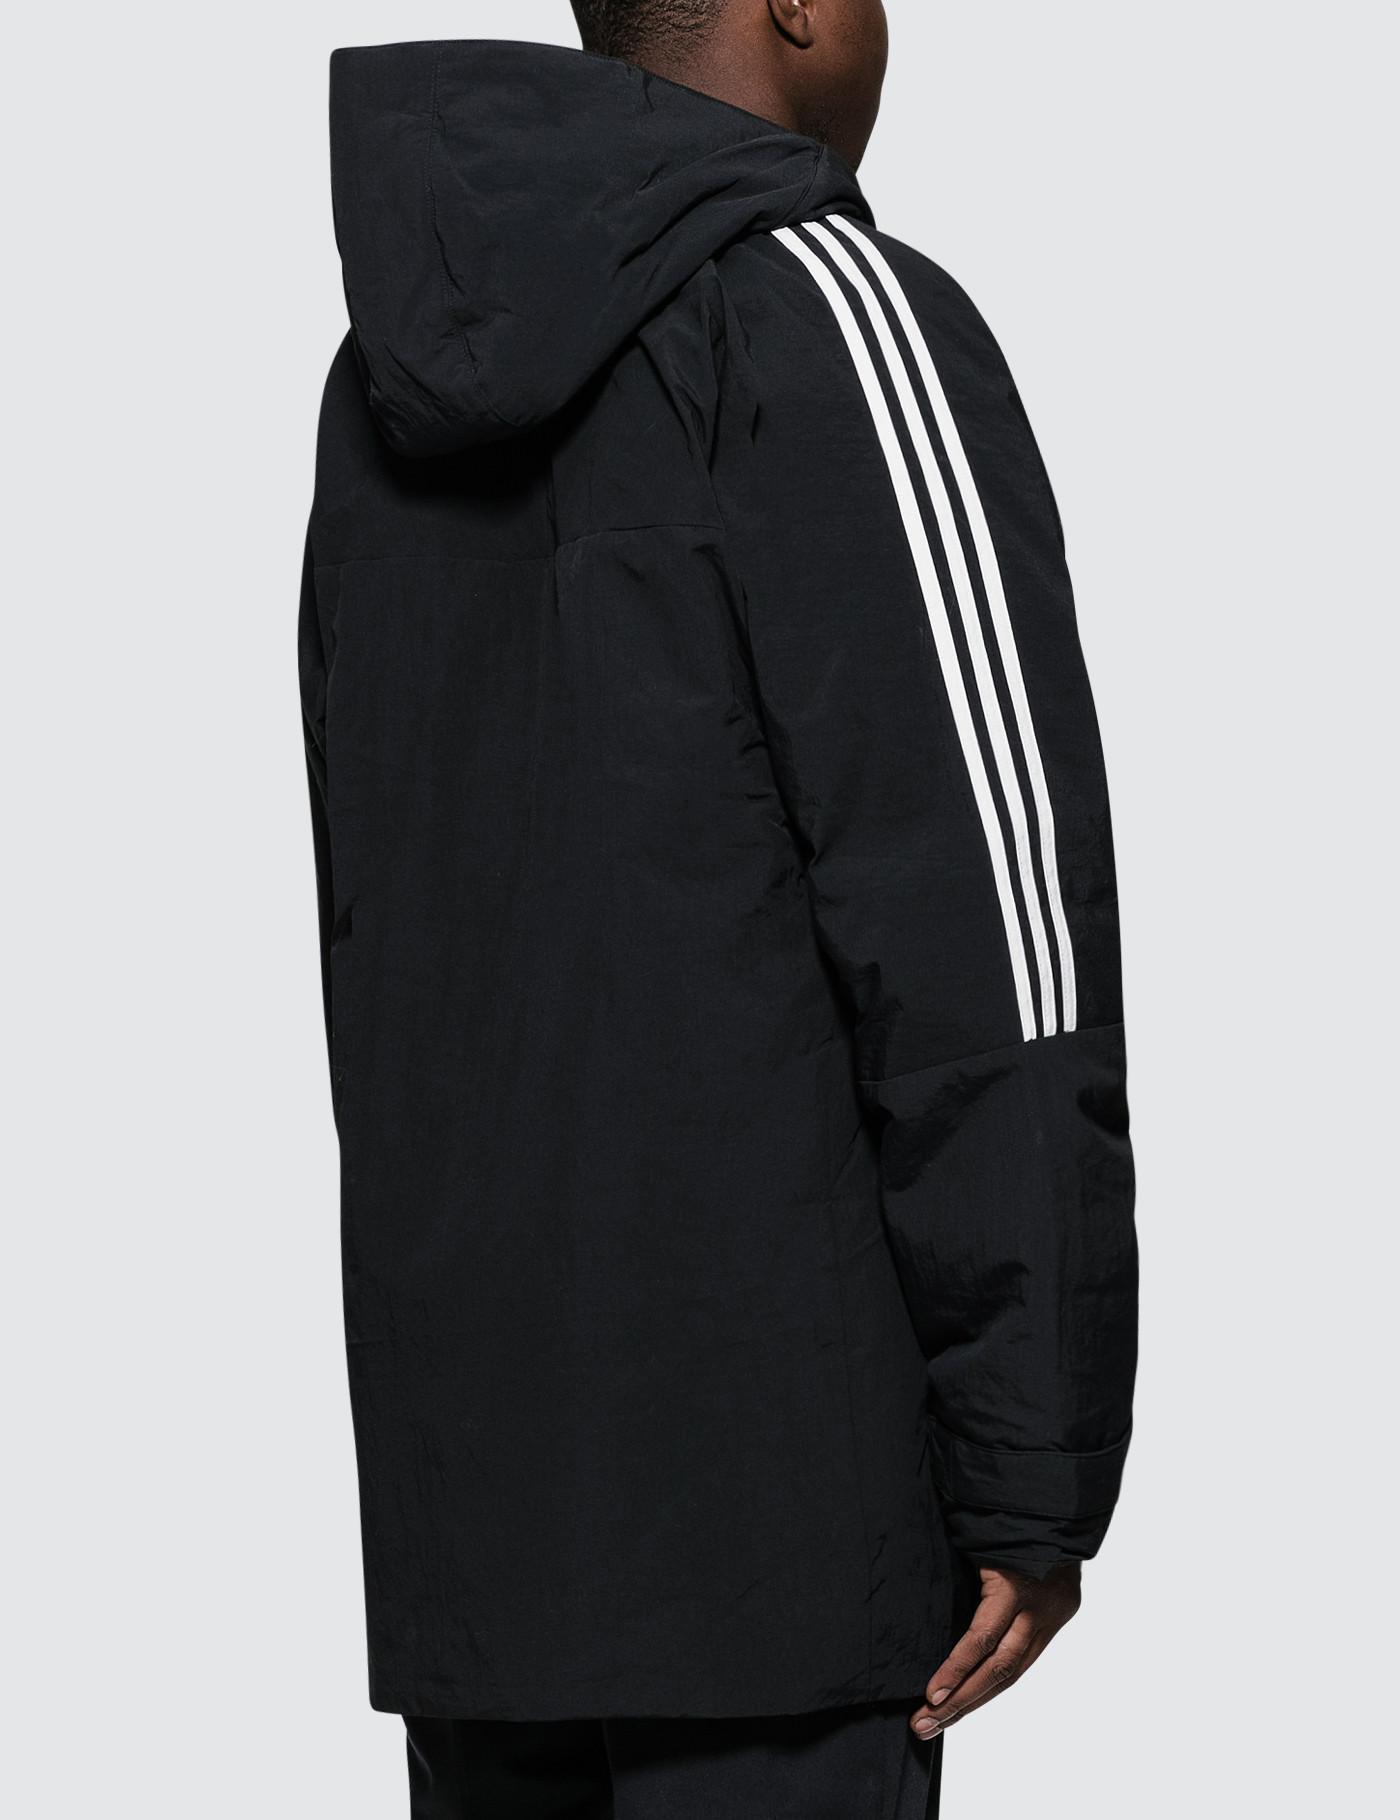 adidas Originals Synthetic Down Parka in Black for Men - Lyst